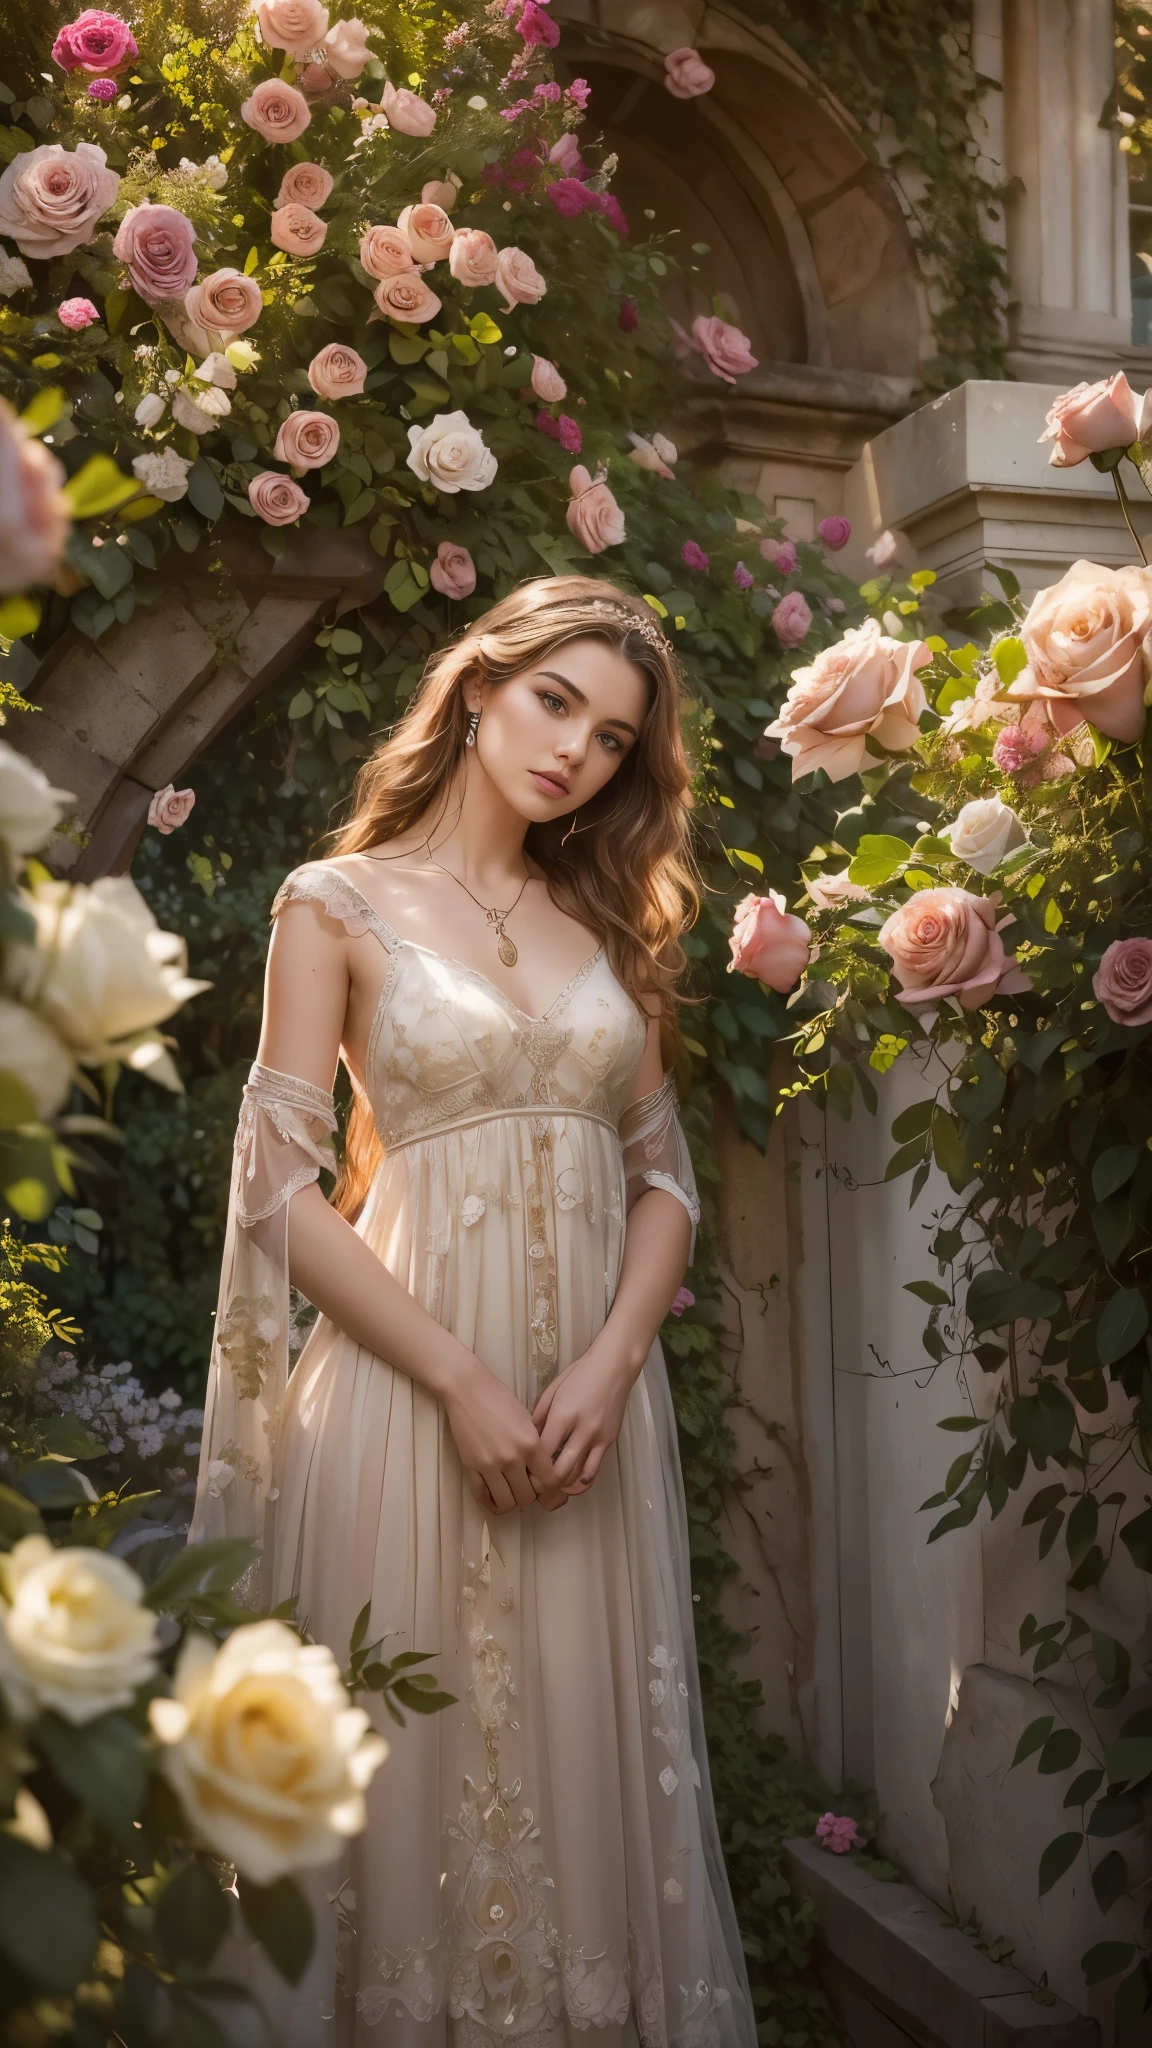 (photograph of a detailed beautiful 18-year old woman with ((facial and body characteristics that is similar to eleonora pavinato))), (), ((Enchanted Garden Romance: Theme: Lost in a fairytale garden of love. Clothing: Ethereal and flowy dresses, floral accents. Scene: Lush garden settings, blooming flower arches, or hidden gazebos. Props: Bouquets of flowers, romantic novels, or love letters. Location: Botanical gardens, rose gardens, or private estates. Weather/Lighting: Soft, natural lighting with a hint of golden hour glow.)), (), (), finely detailed, ultra-realistic features of her pale skin and (slender and athletic body), and (symmetrical, realistic and beautiful face), candid, (), (), (()), (), film stock photograph, rich colors, hyper realistic, lifelike texture, dramatic lighting, strong contrast
